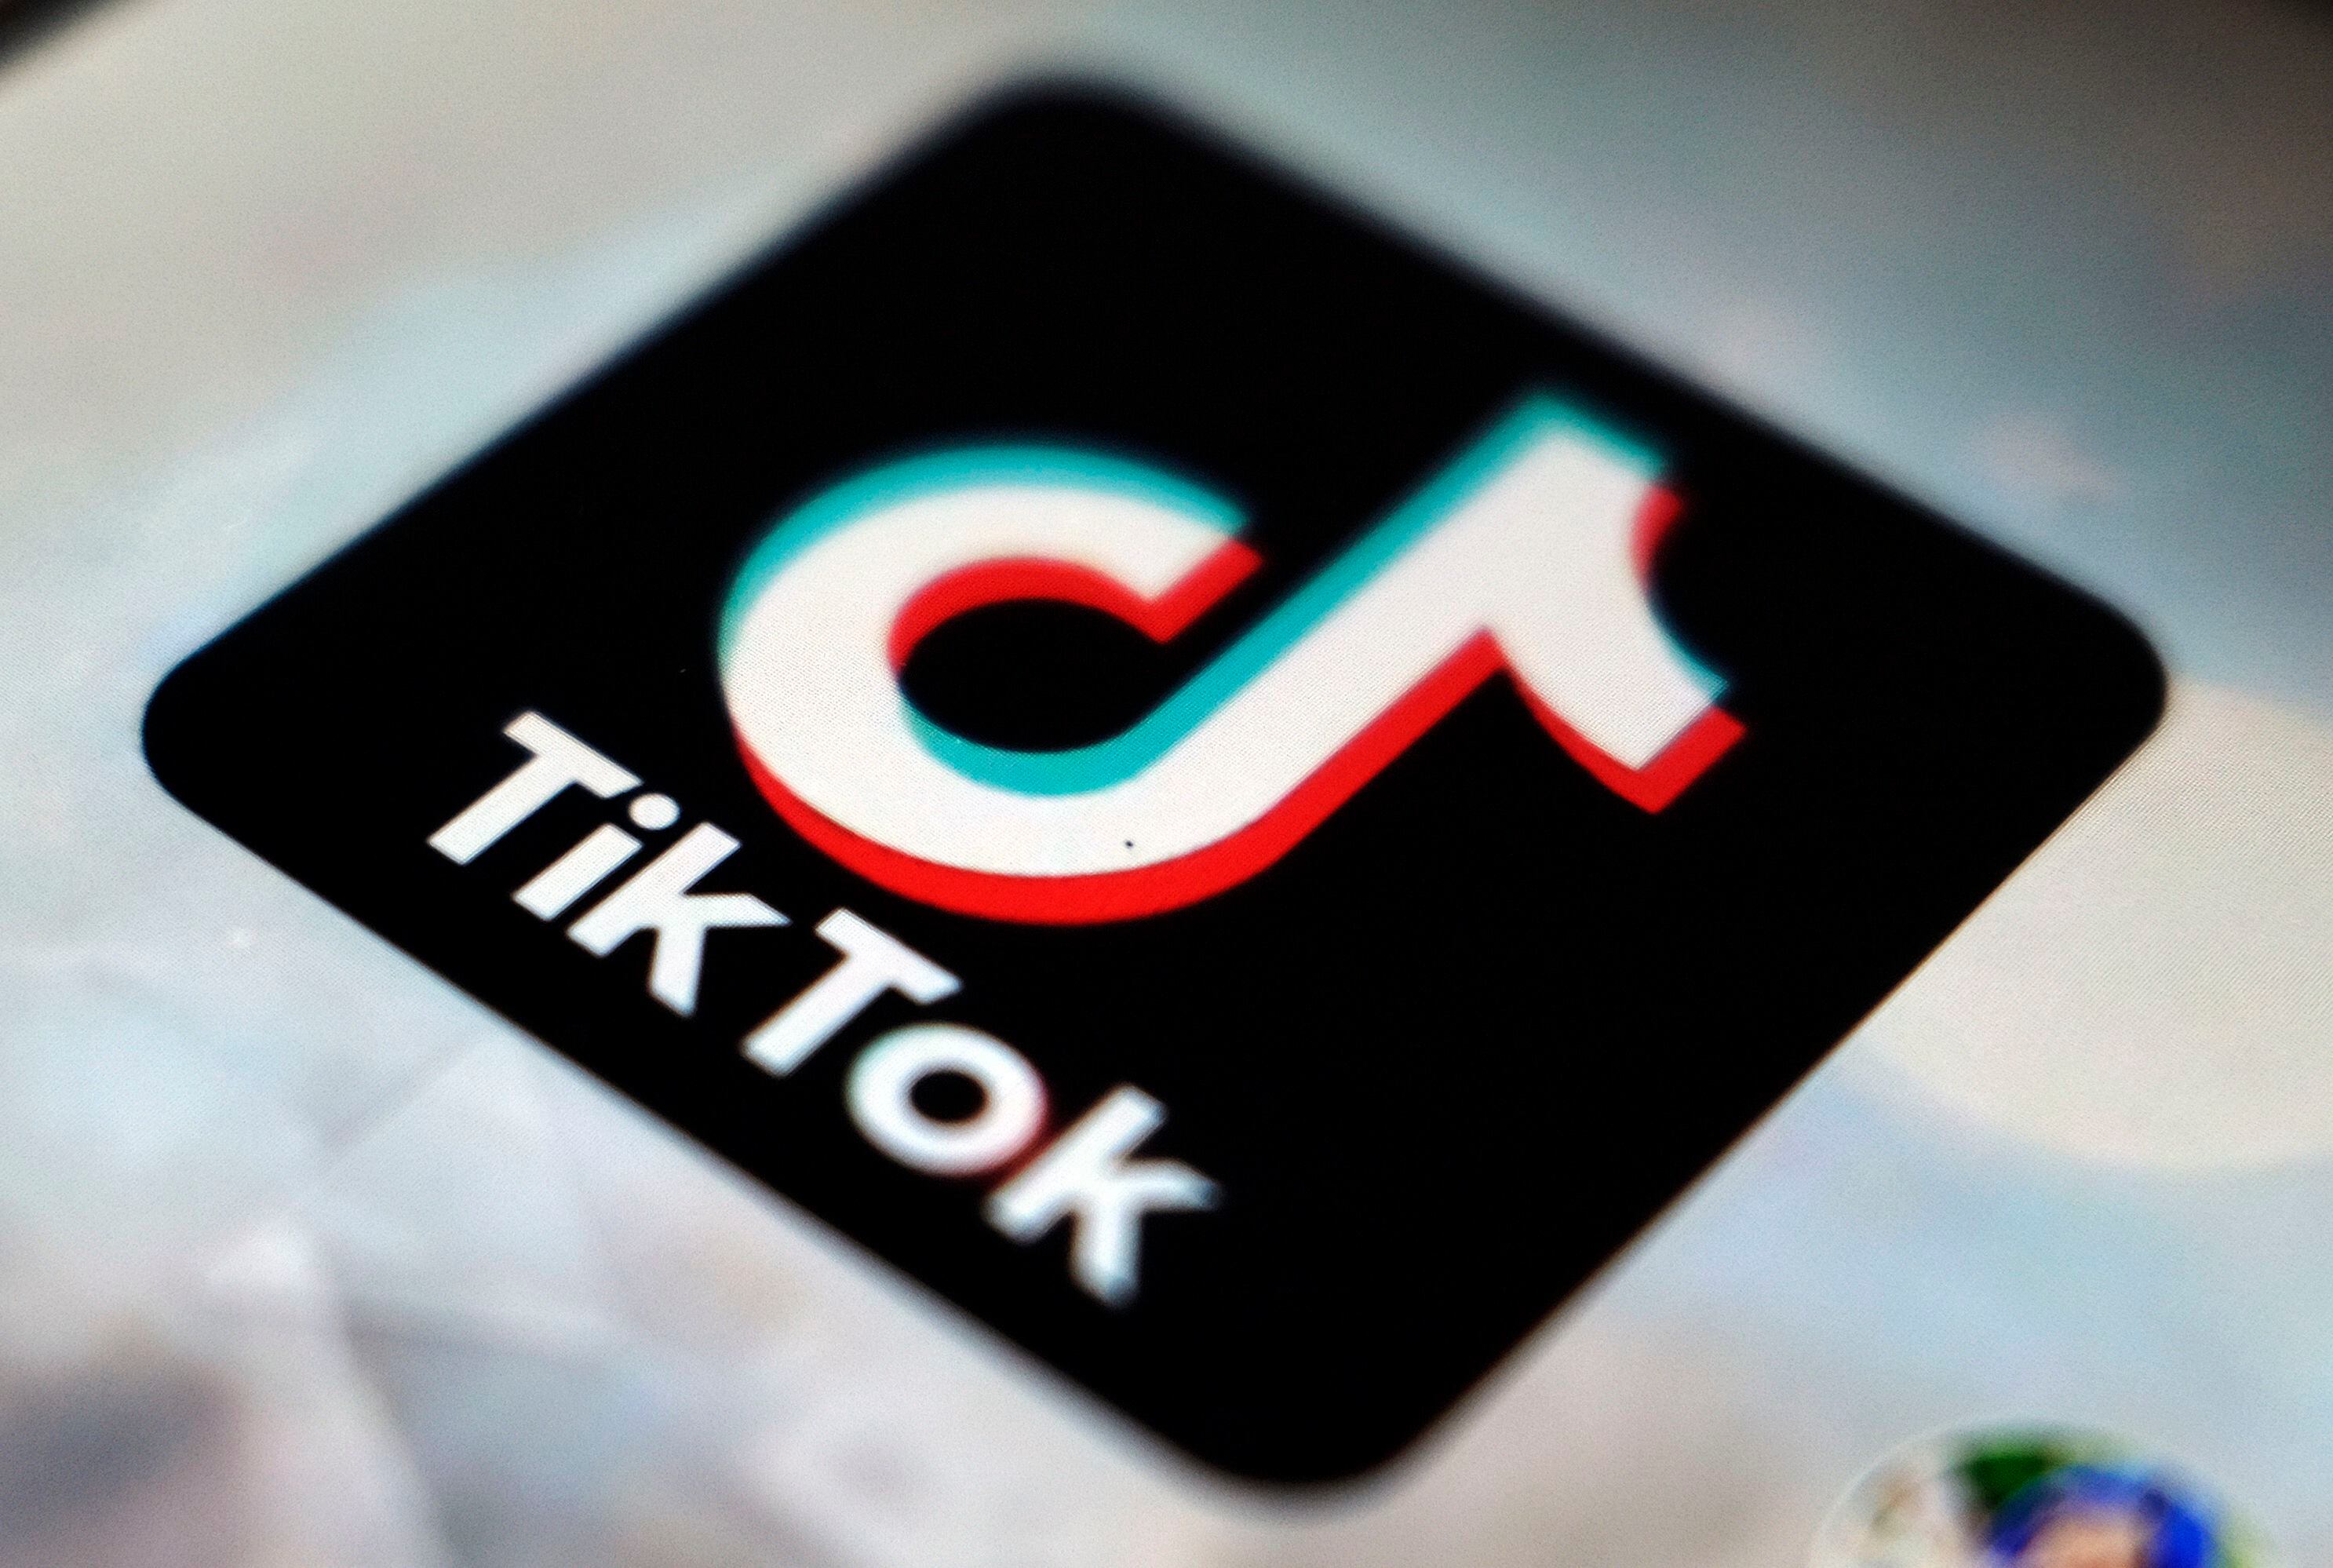 President Biden has signed a law that gives ByteDance up to a year to fully divest from TikTok, or face a nationwide ban.